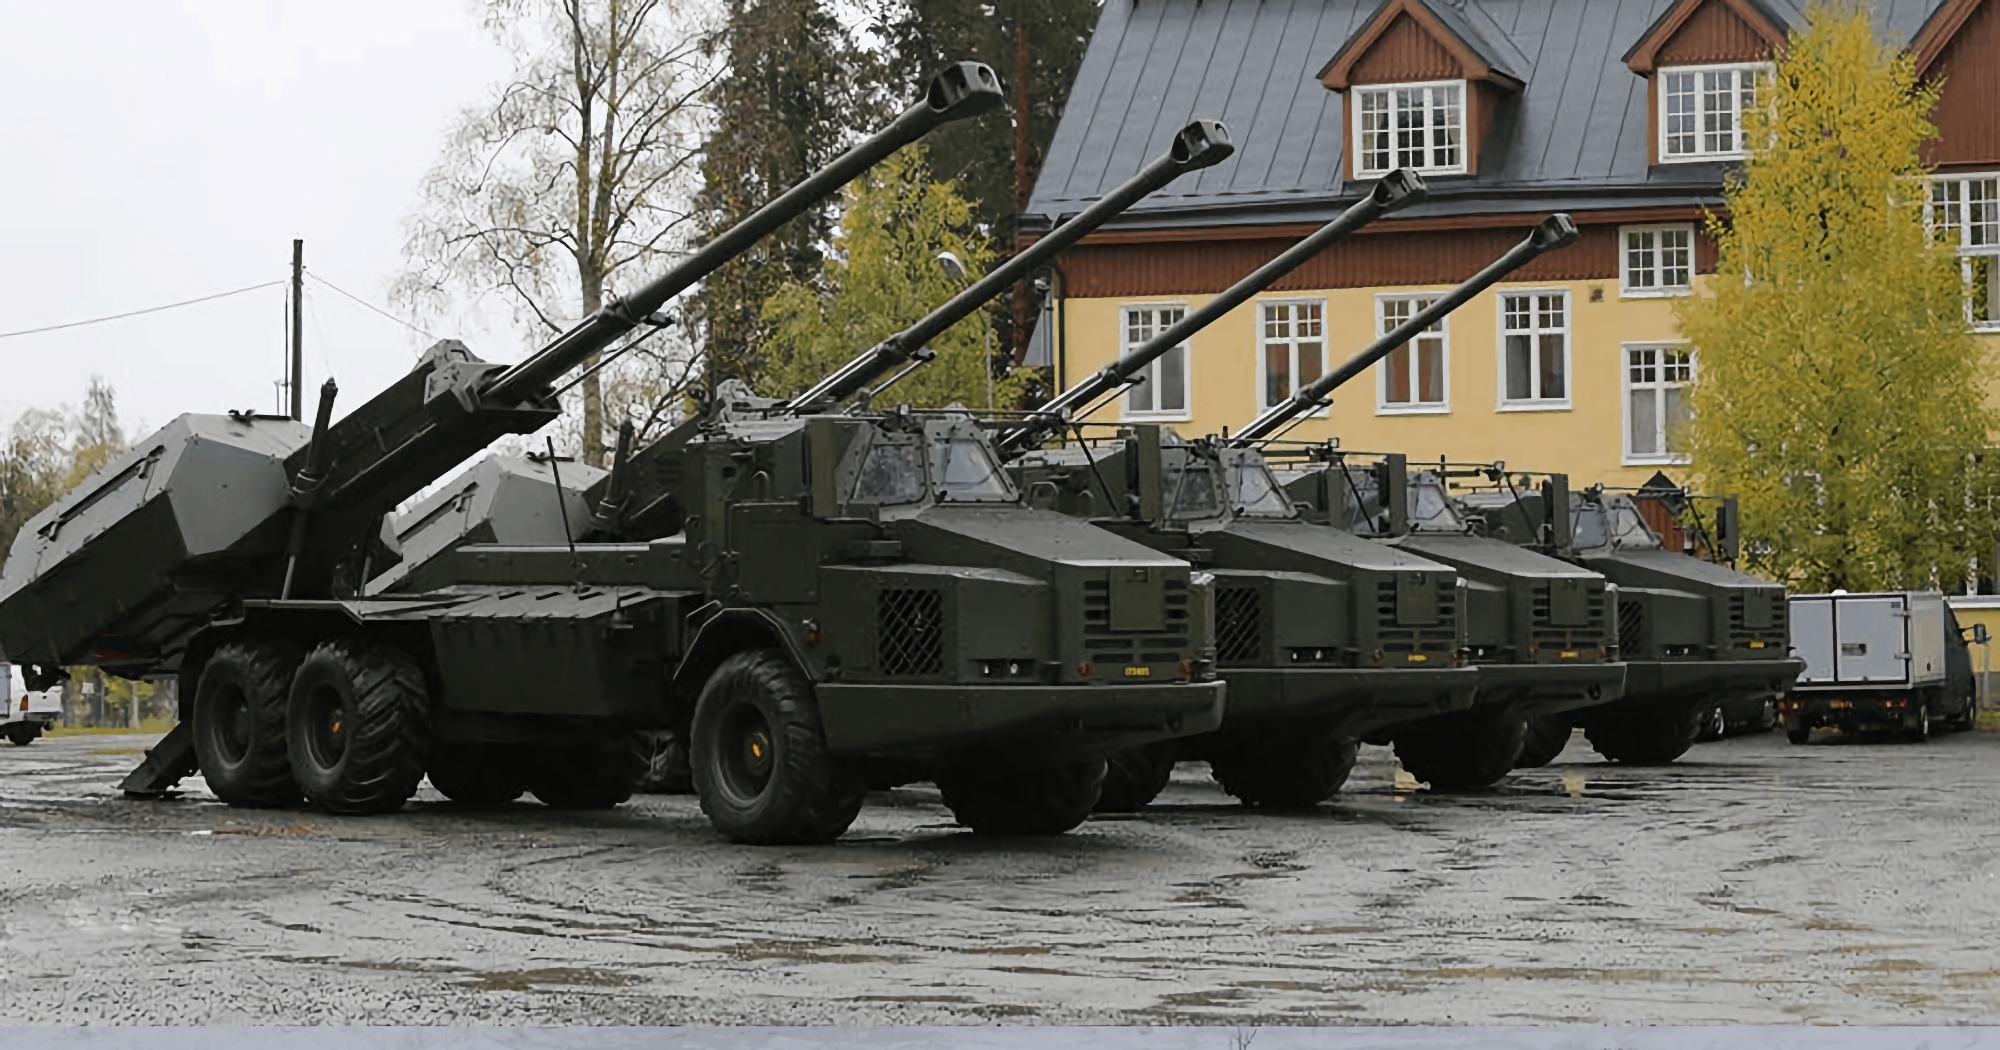 It's official: Sweden gives Ukraine 8 advanced Archer self-propelled artillery units, capable of firing more than 21 rounds in 3.5 minutes